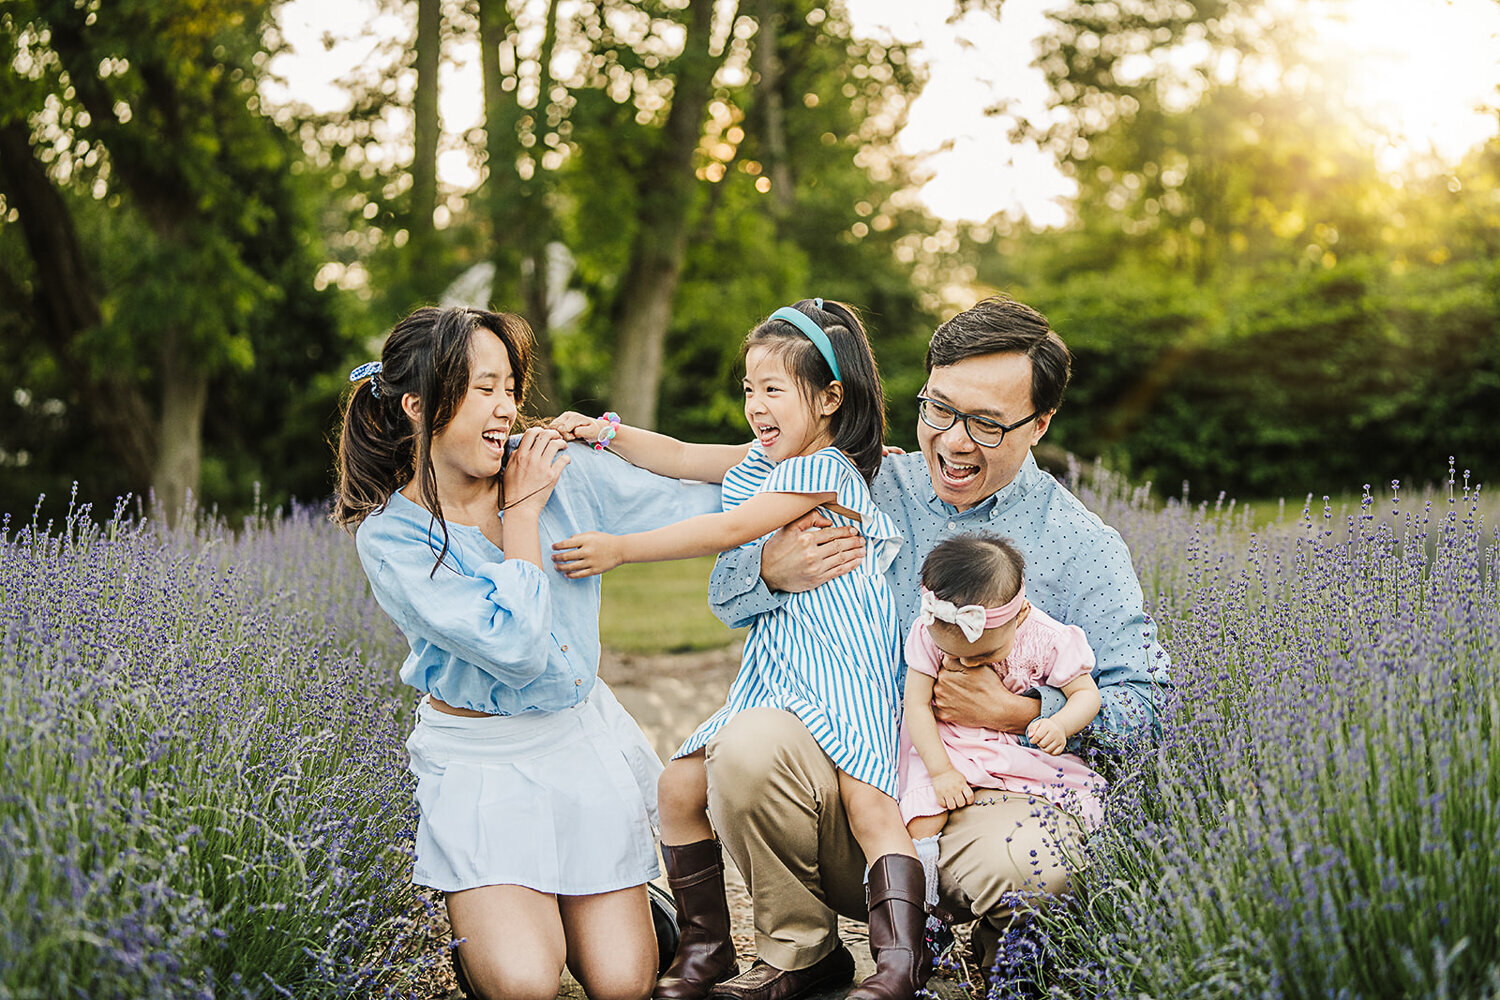 dad laughs with three daughters in a field of lavender